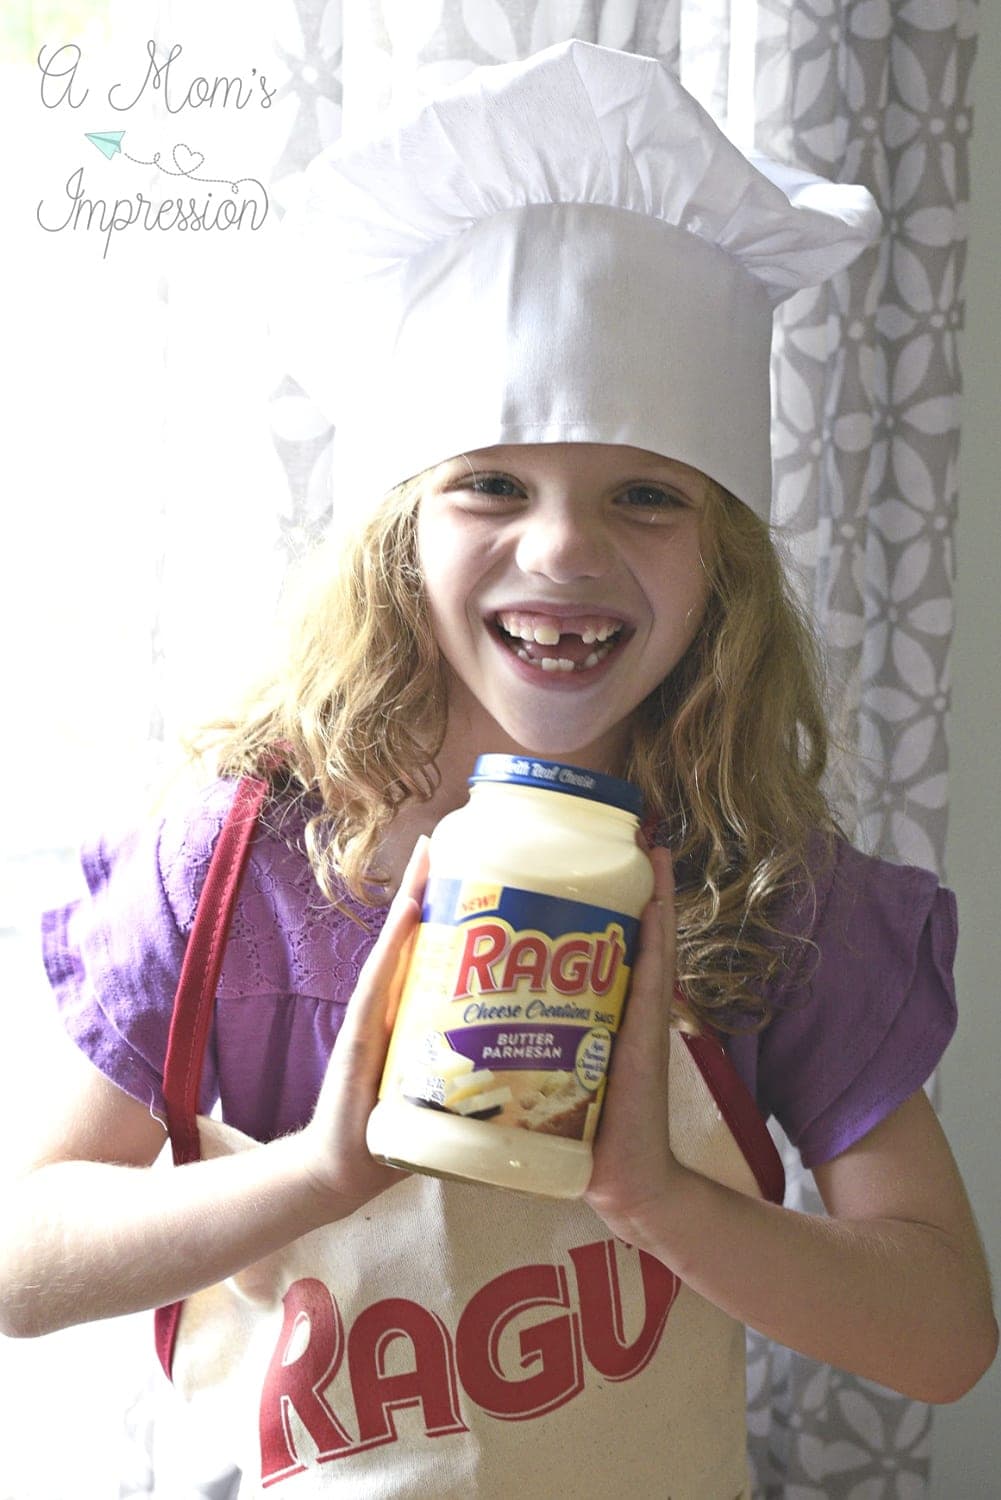 child wearing ragu apron and a chefs hat with a bottle of ragu sauce in her hands